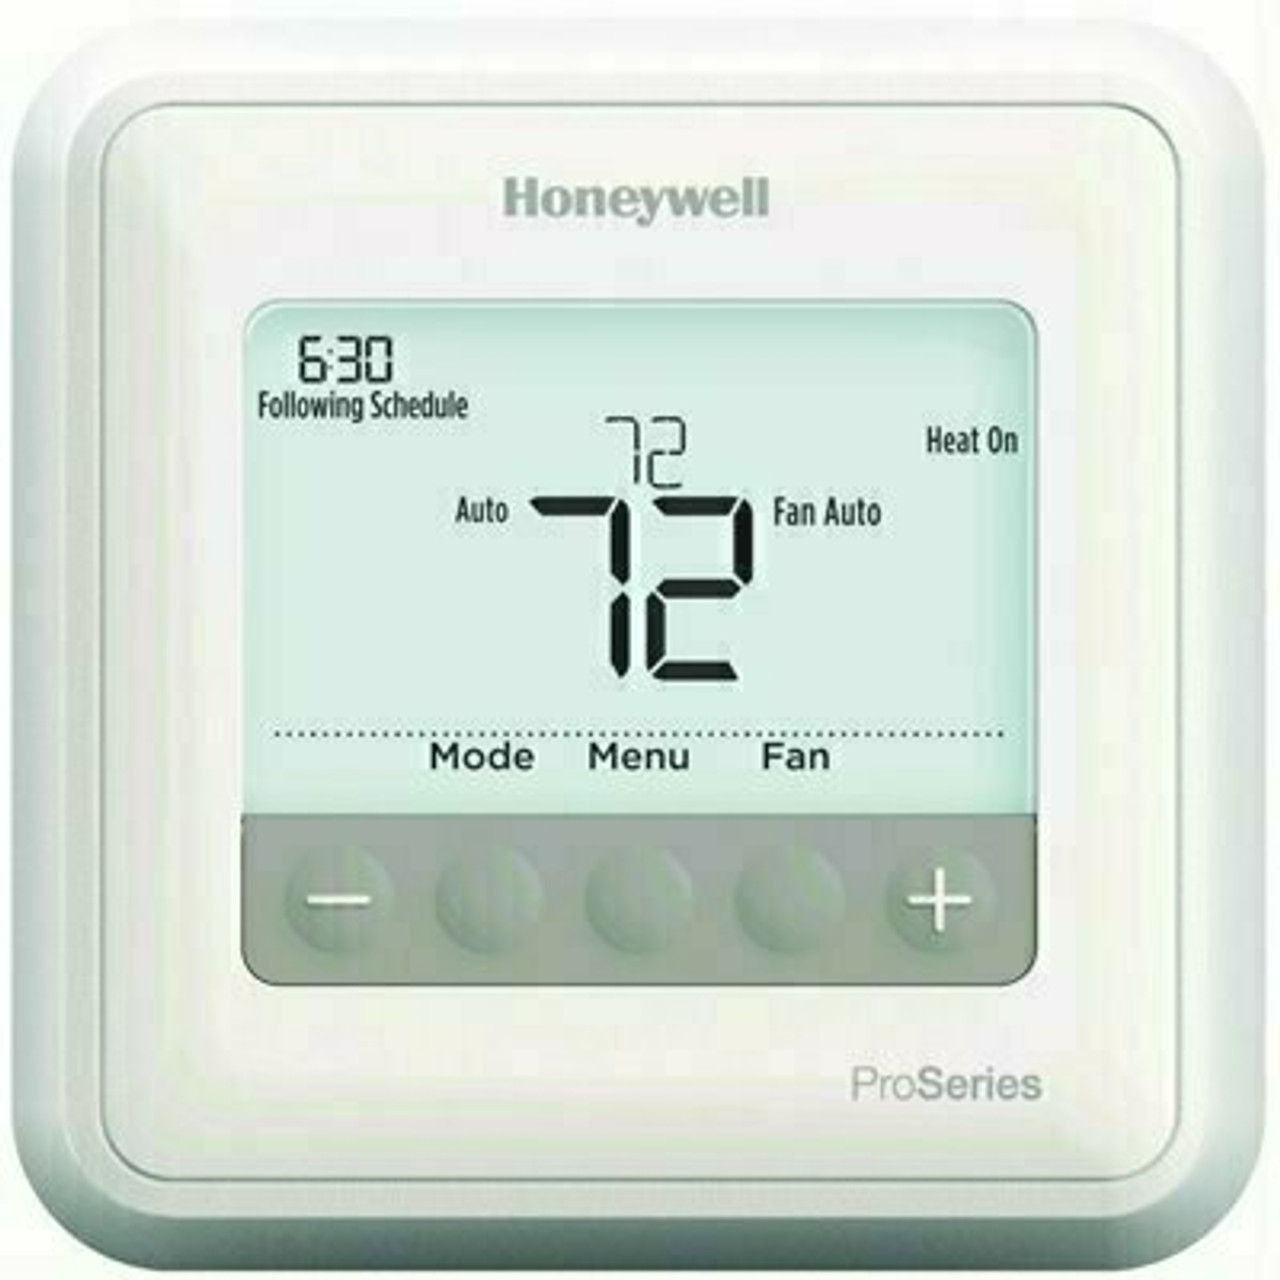 Honeywell T4 7-Day 1-Stage Programmable Private Label Thermostat